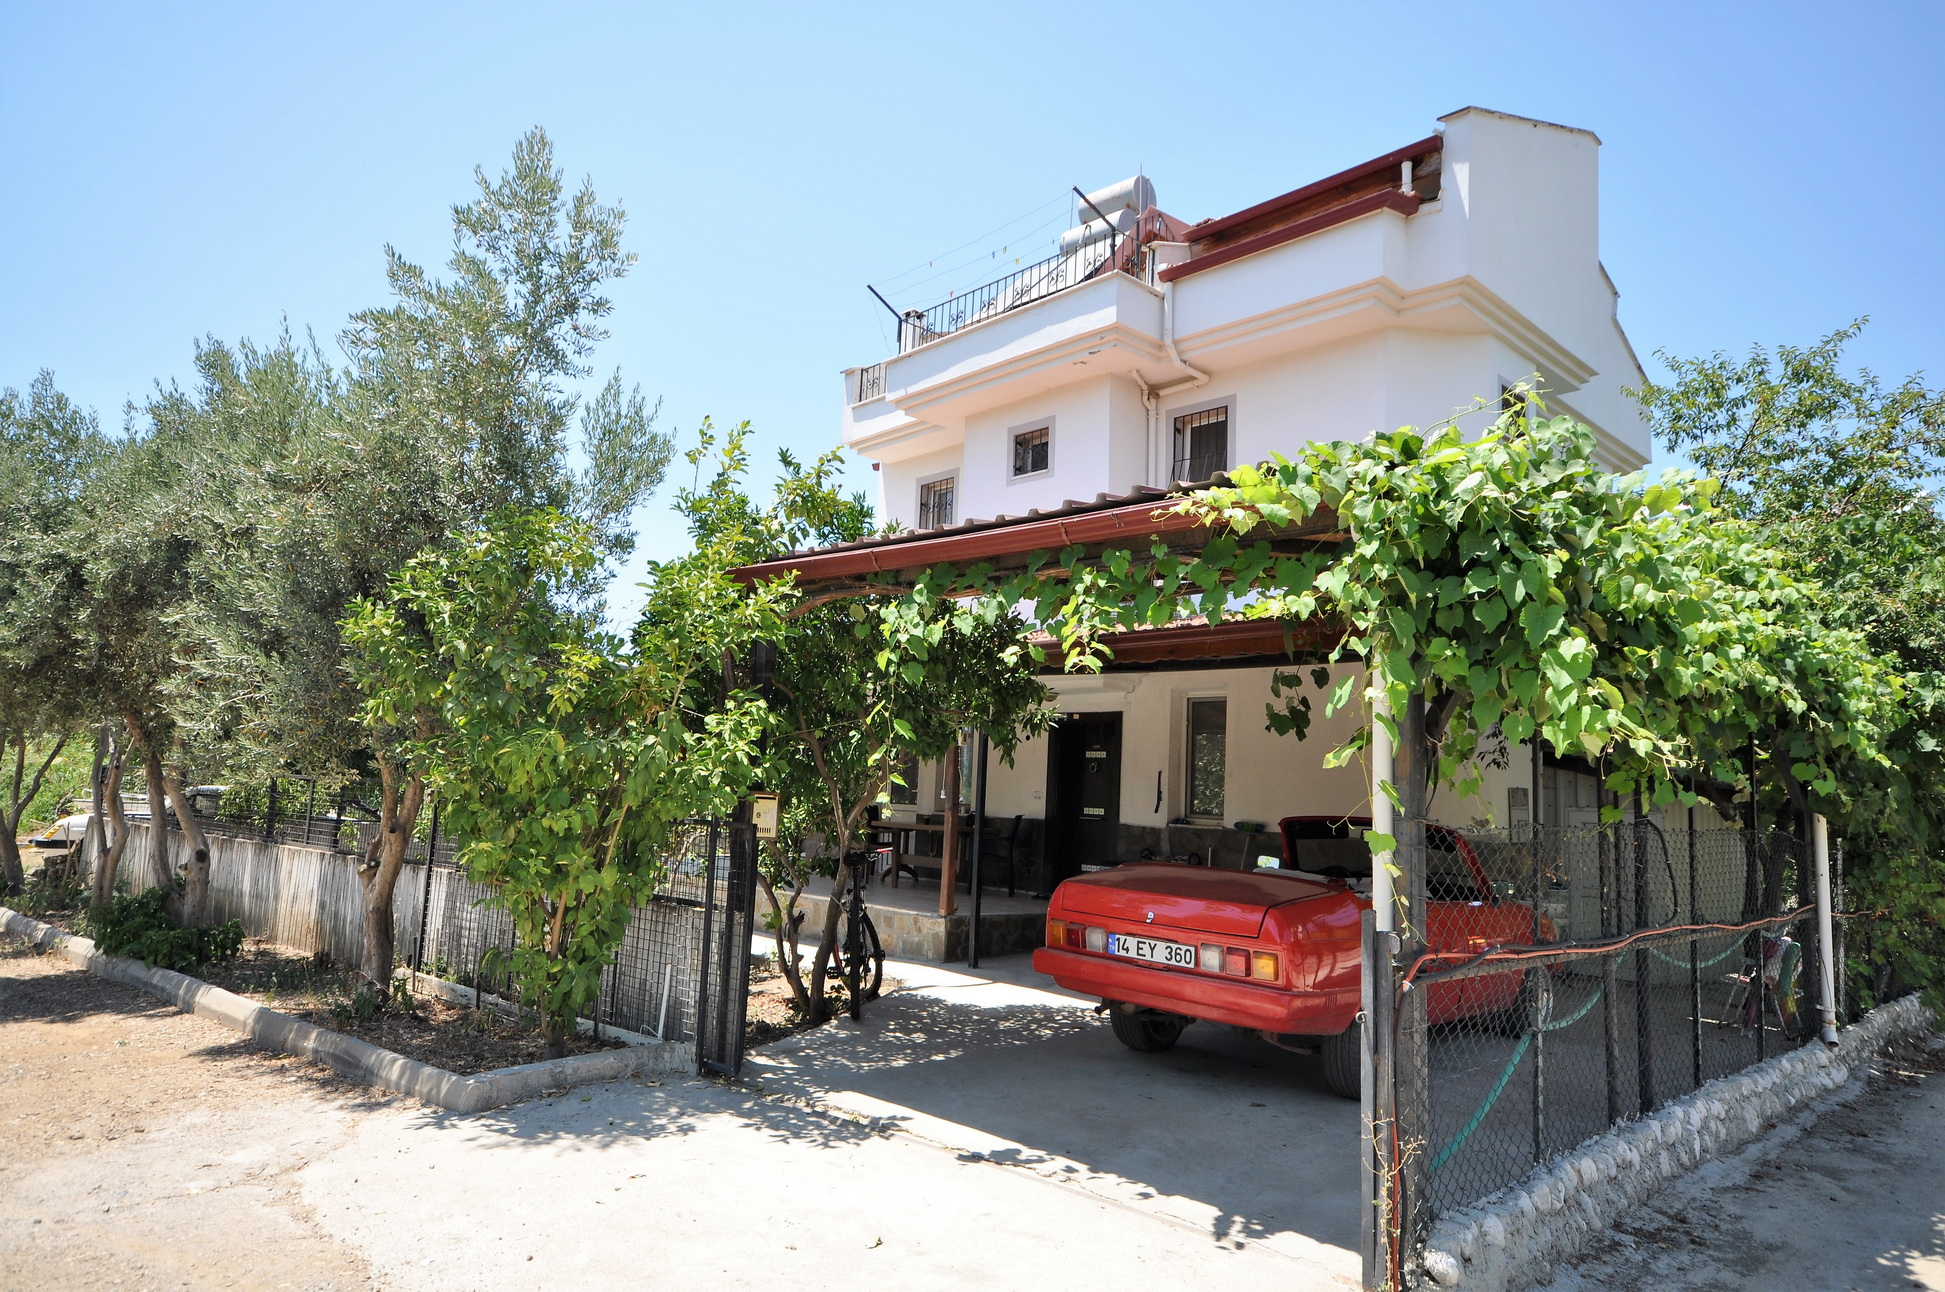 Detached Calis villa with a private mature garden and car park